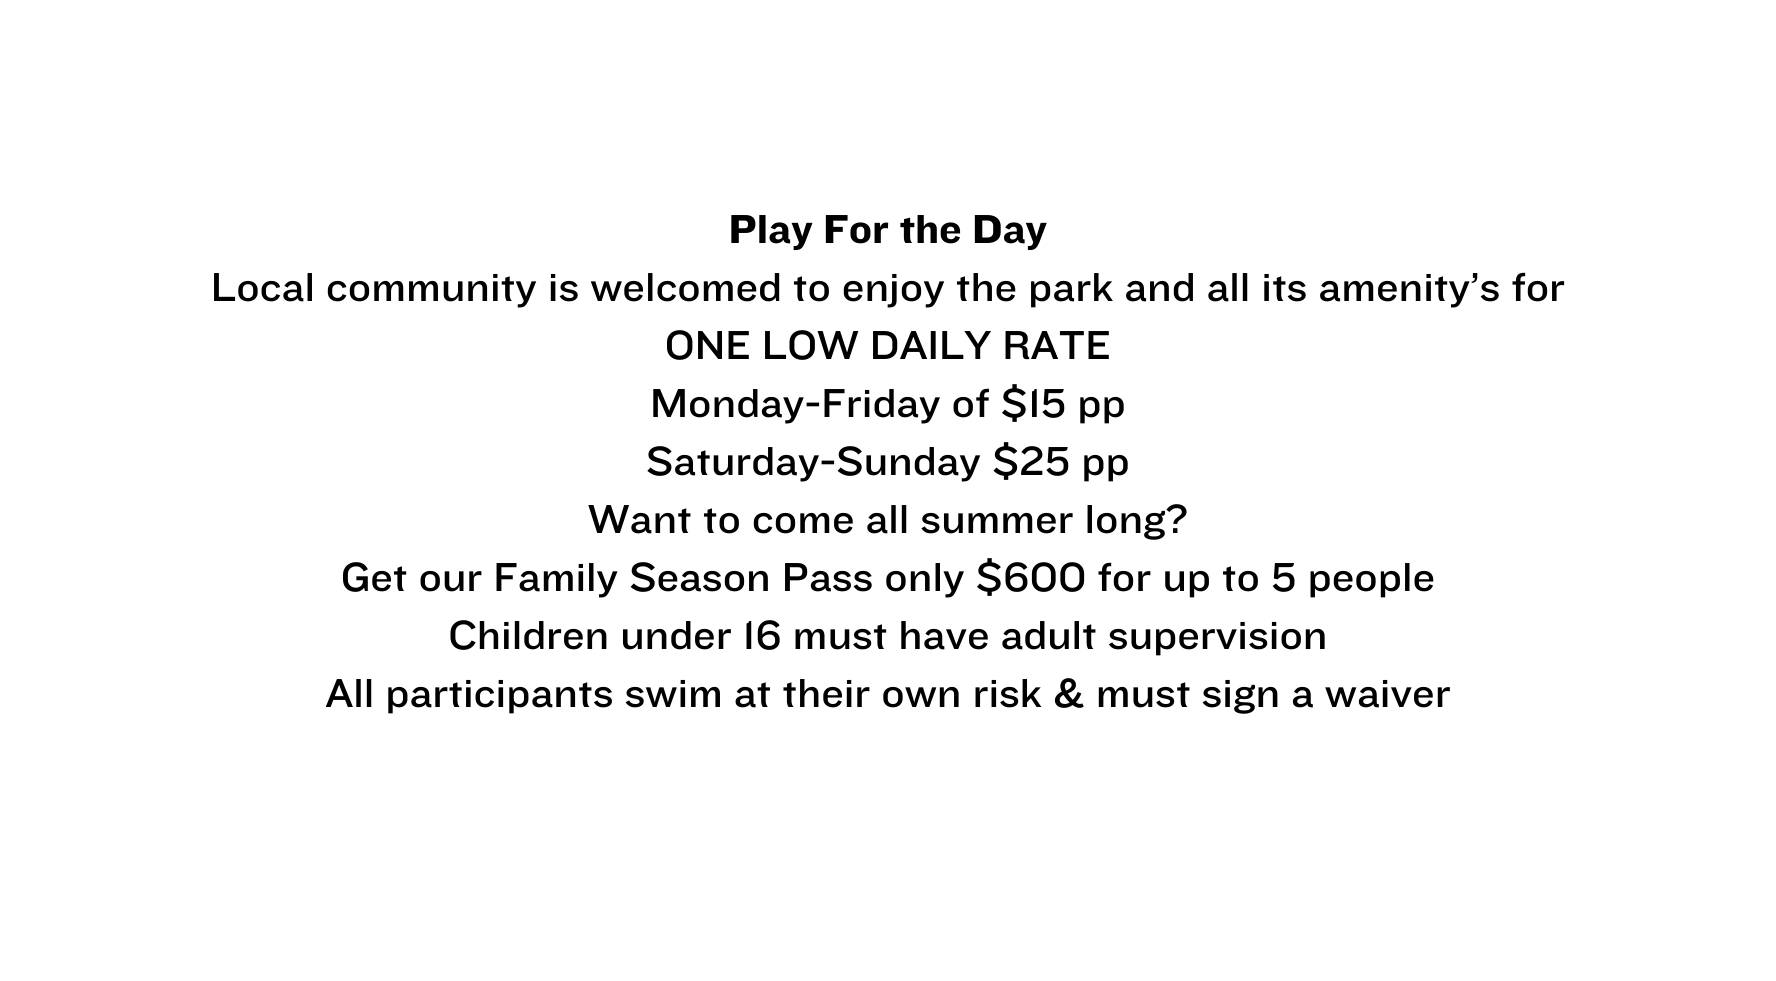 Play For the Day Local community is welcomed to enjoy the park and all its amenity s for ONE LOW DAILY RATE Monday Friday of 15 pp Saturday Sunday 25 pp Want to come all summer long Get our Family Season Pass only 600 for up to 5 people Children under 16 must have adult supervision All participants swim at their own risk must sign a waiver